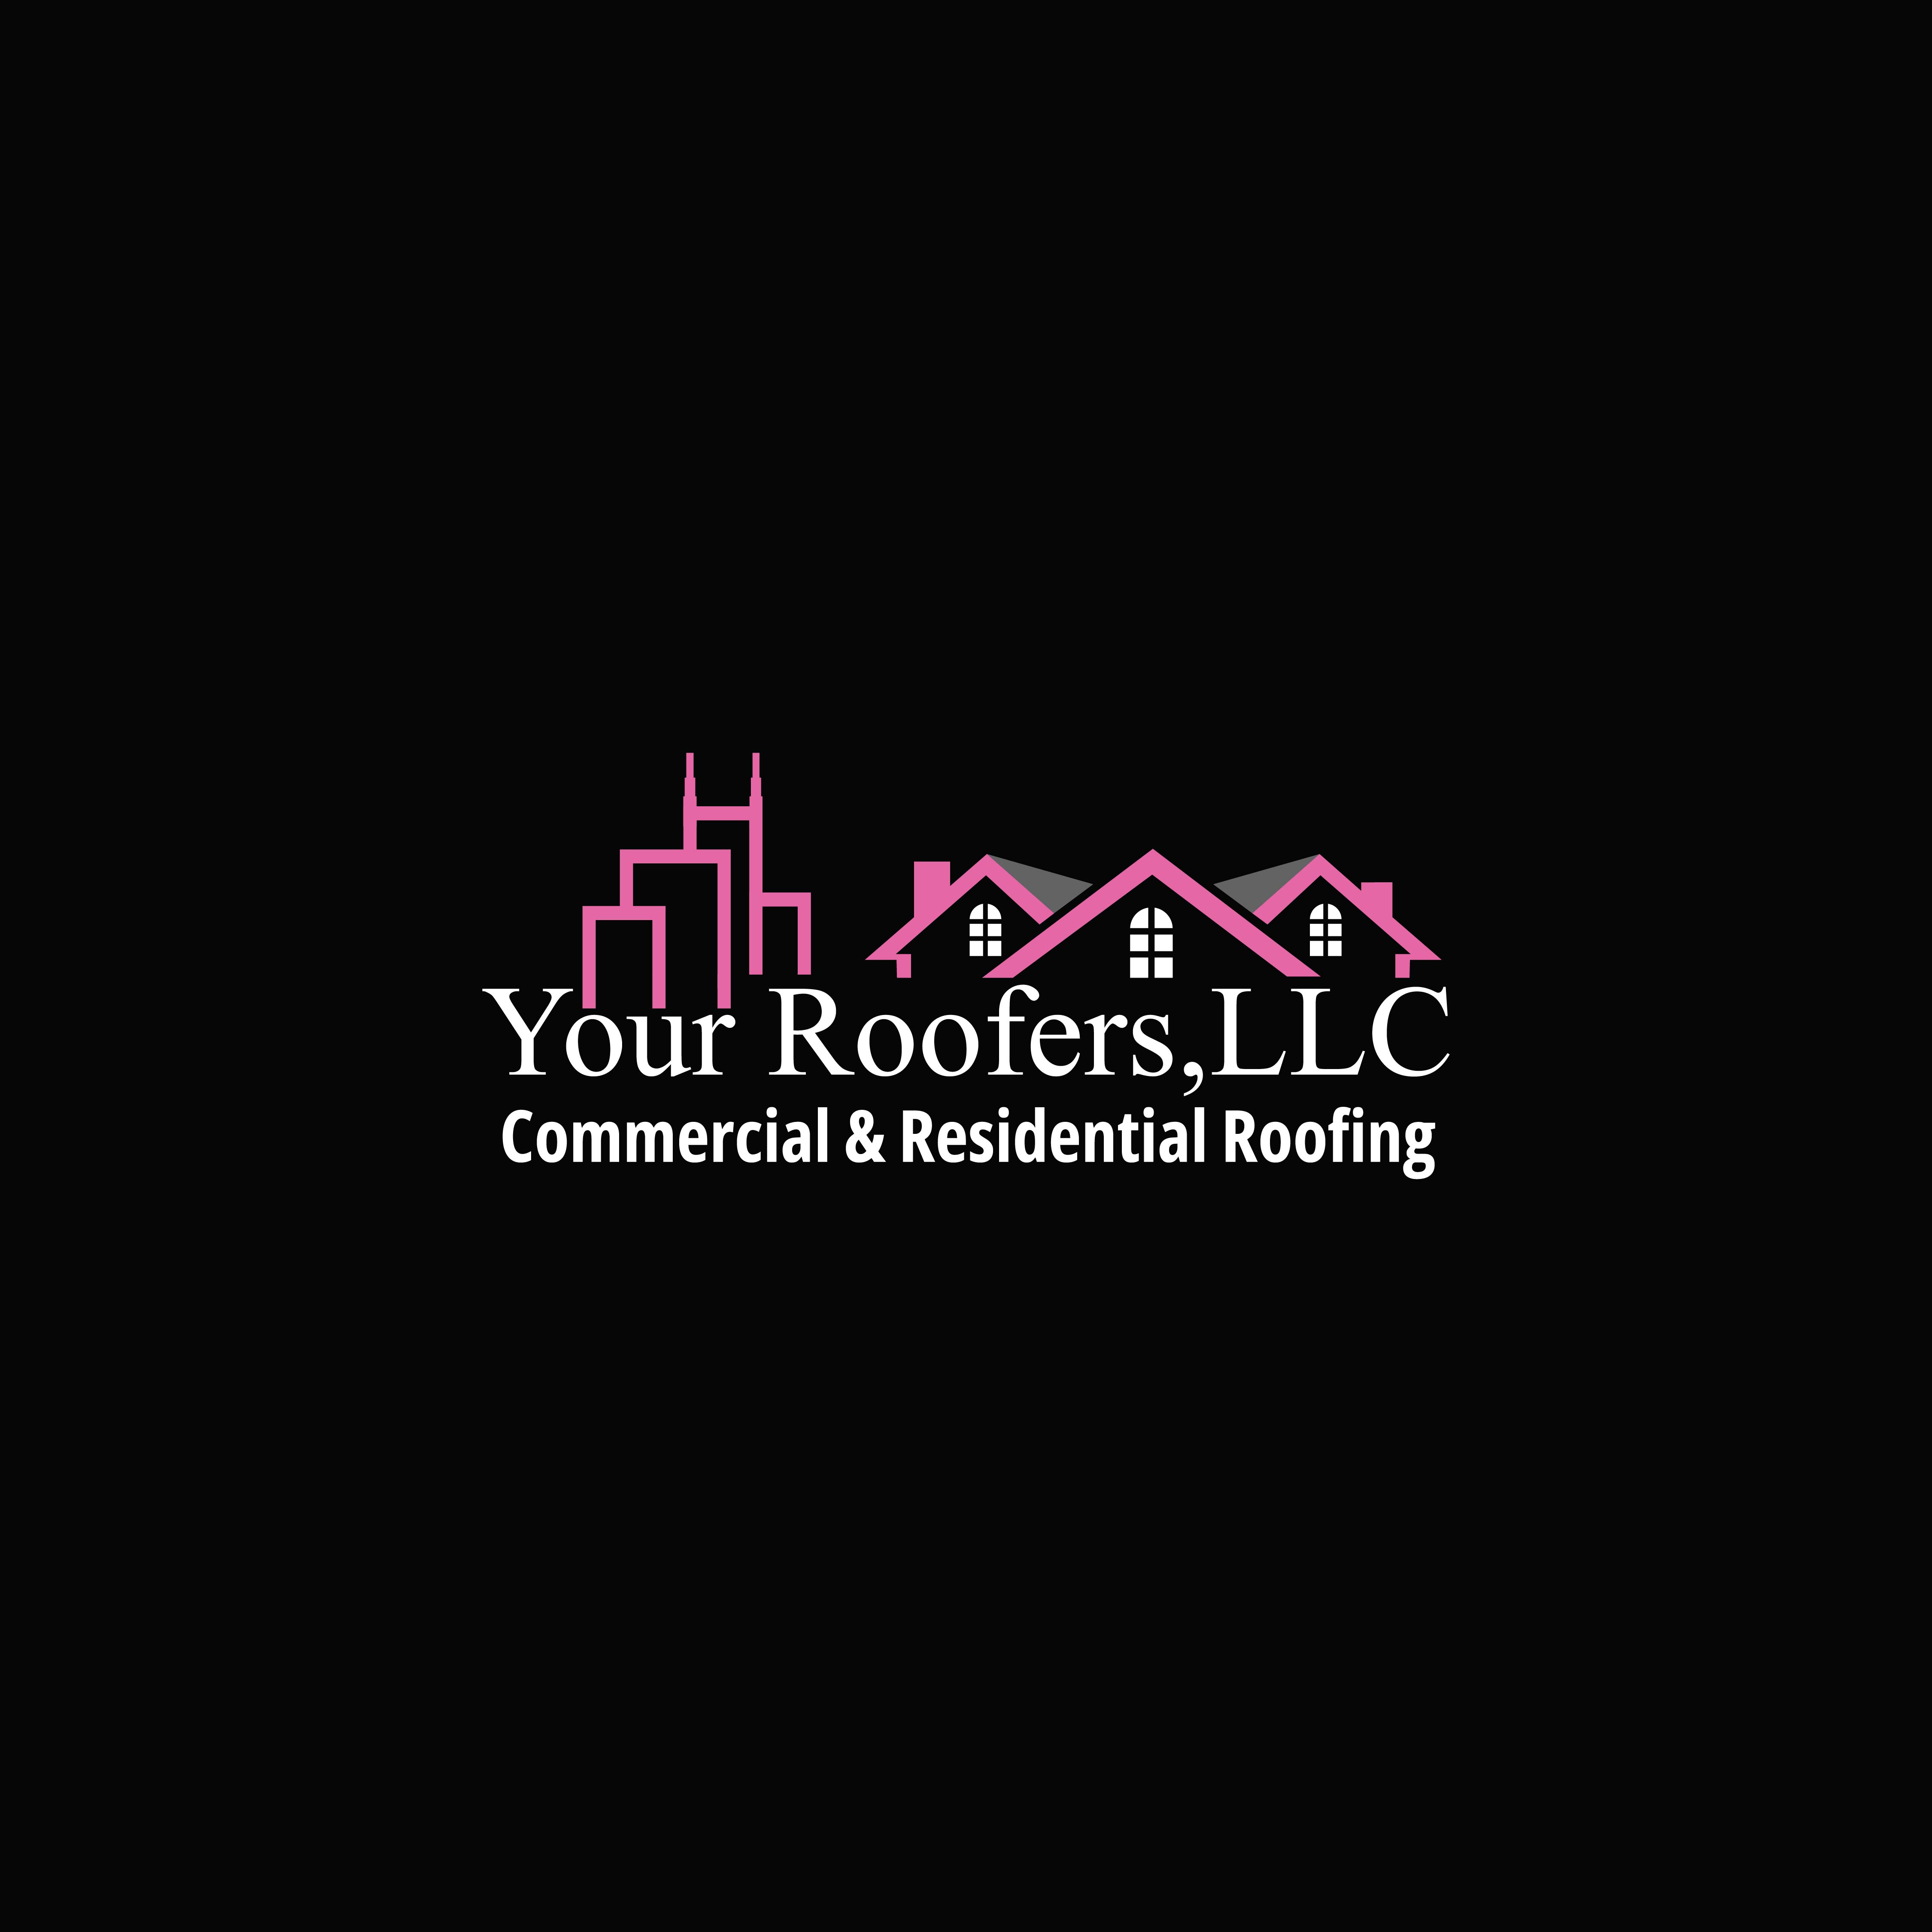 Your Roofers LLC Logo